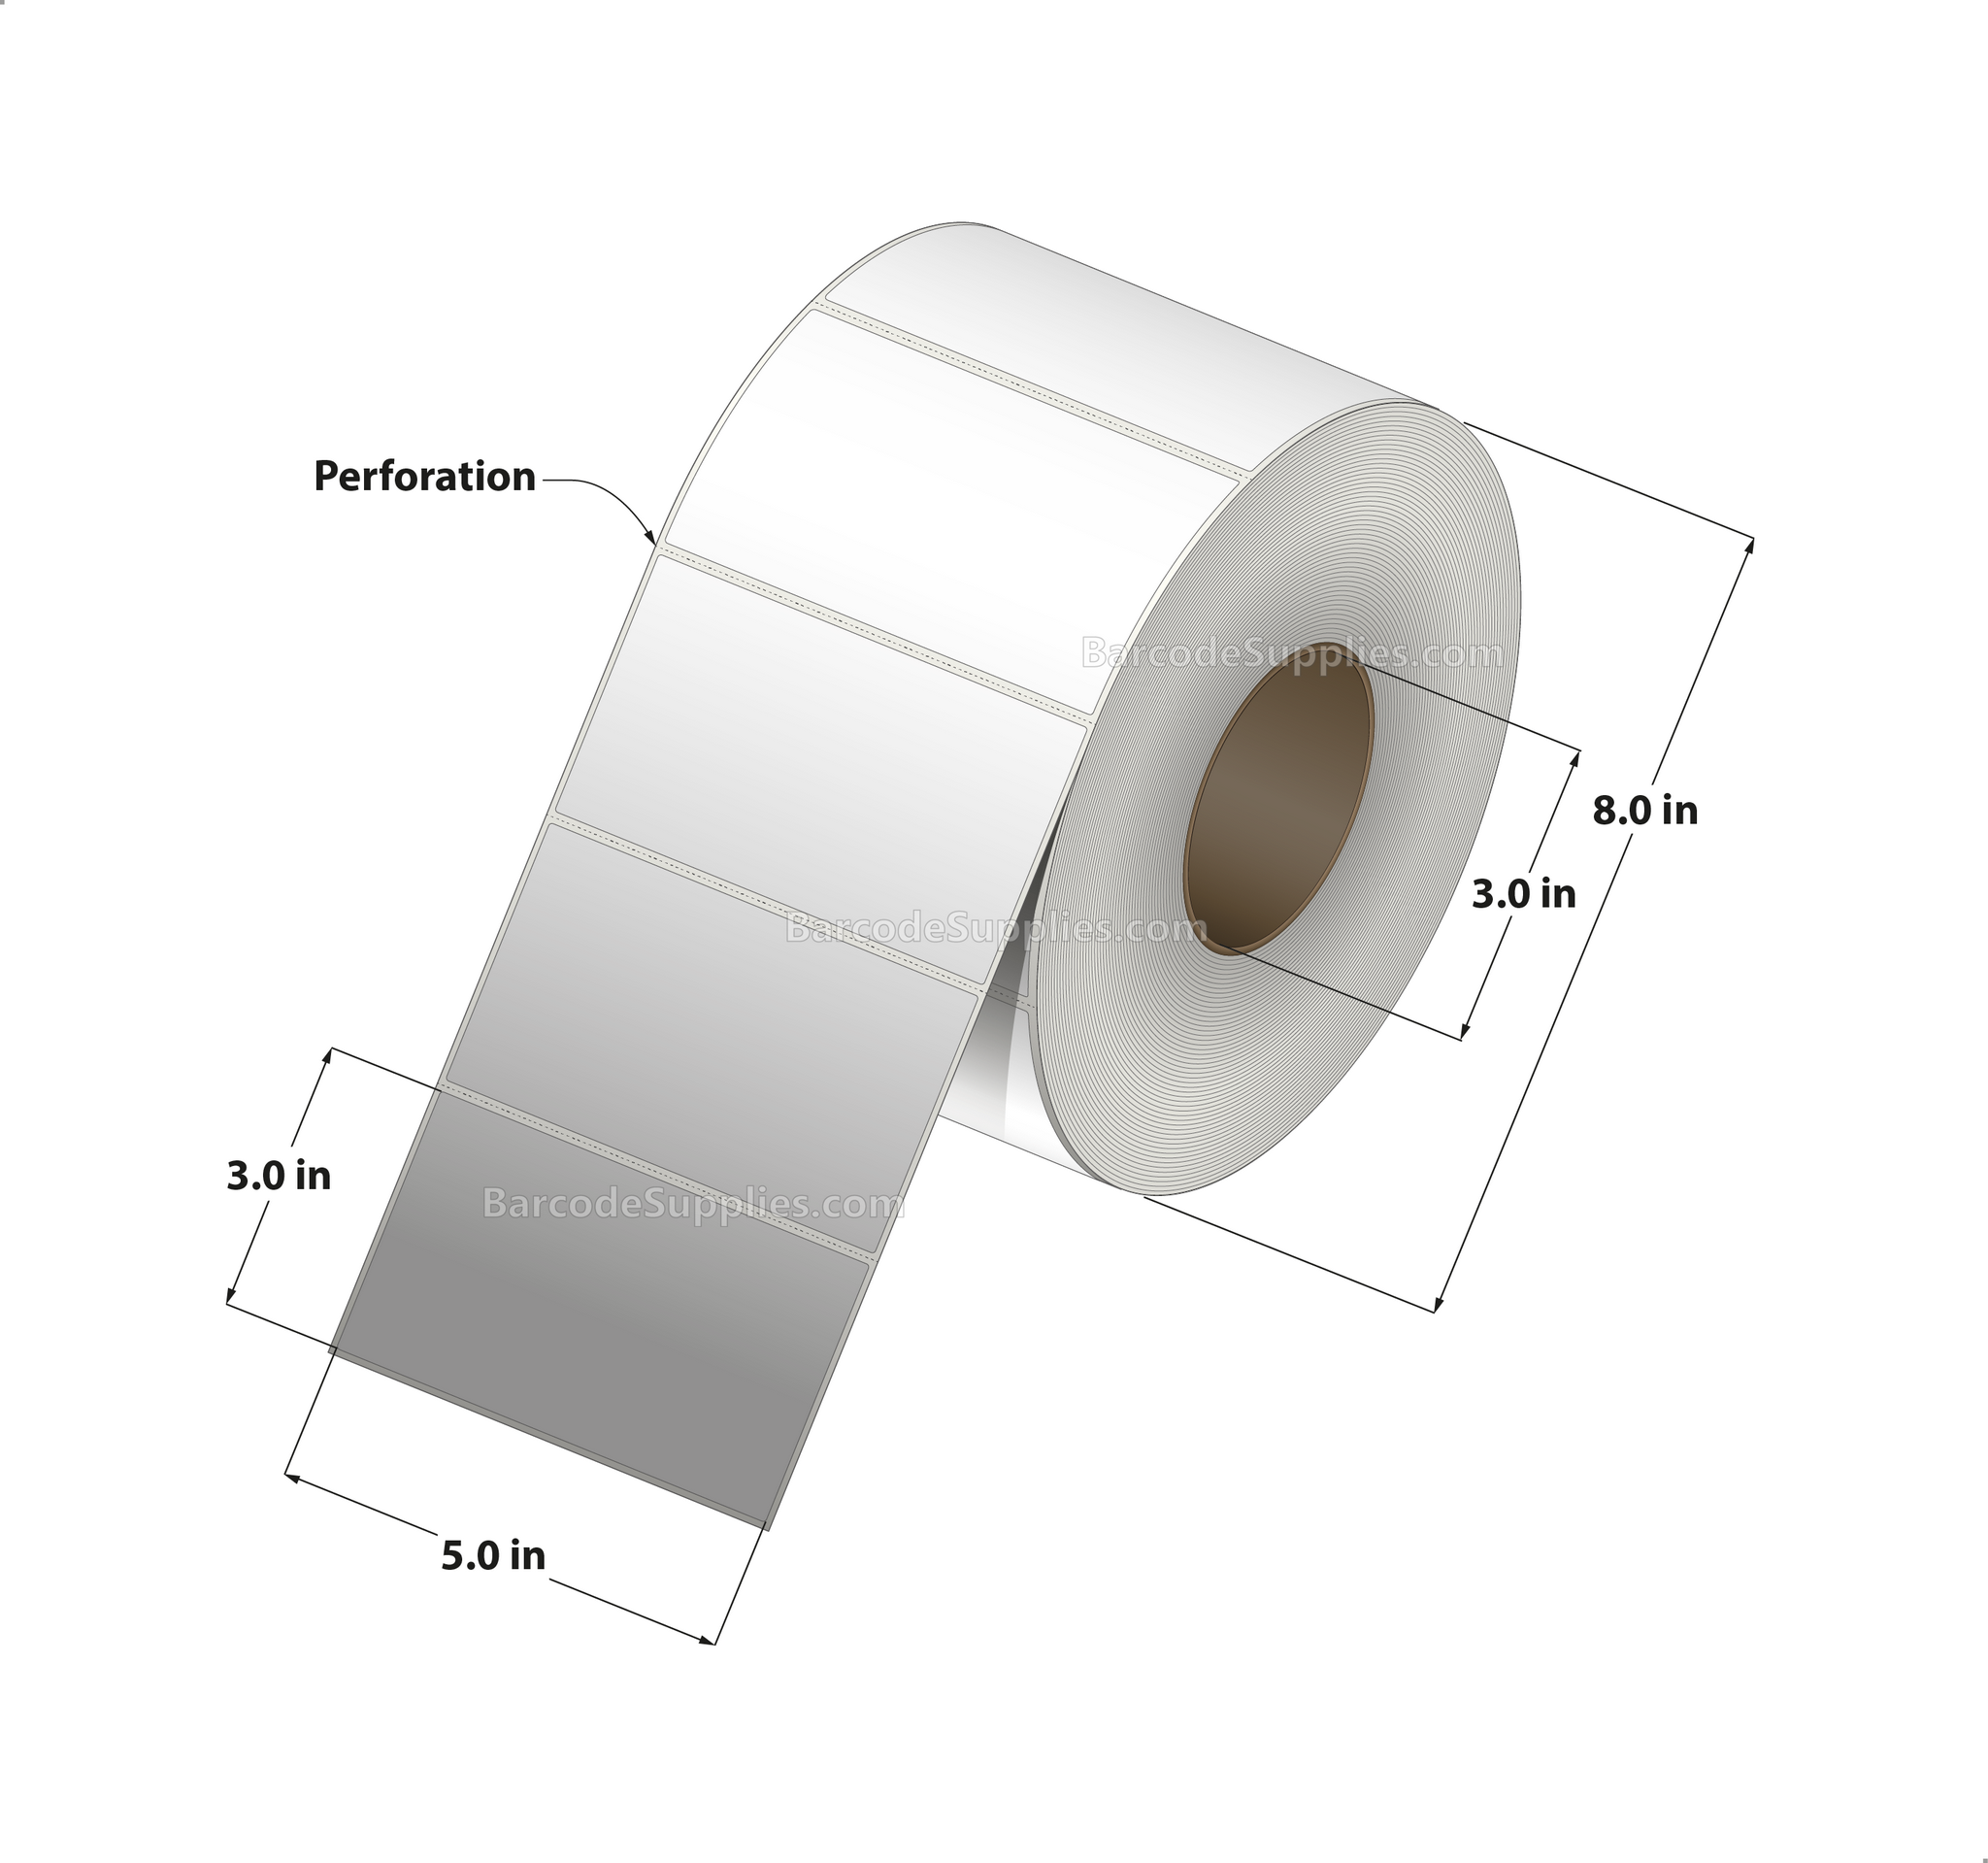 5 x 3 Thermal Transfer White Labels With Permanent Adhesive - Perforated - 1900 Labels Per Roll - Carton Of 4 Rolls - 7600 Labels Total - MPN: RT-5-3-1900-3